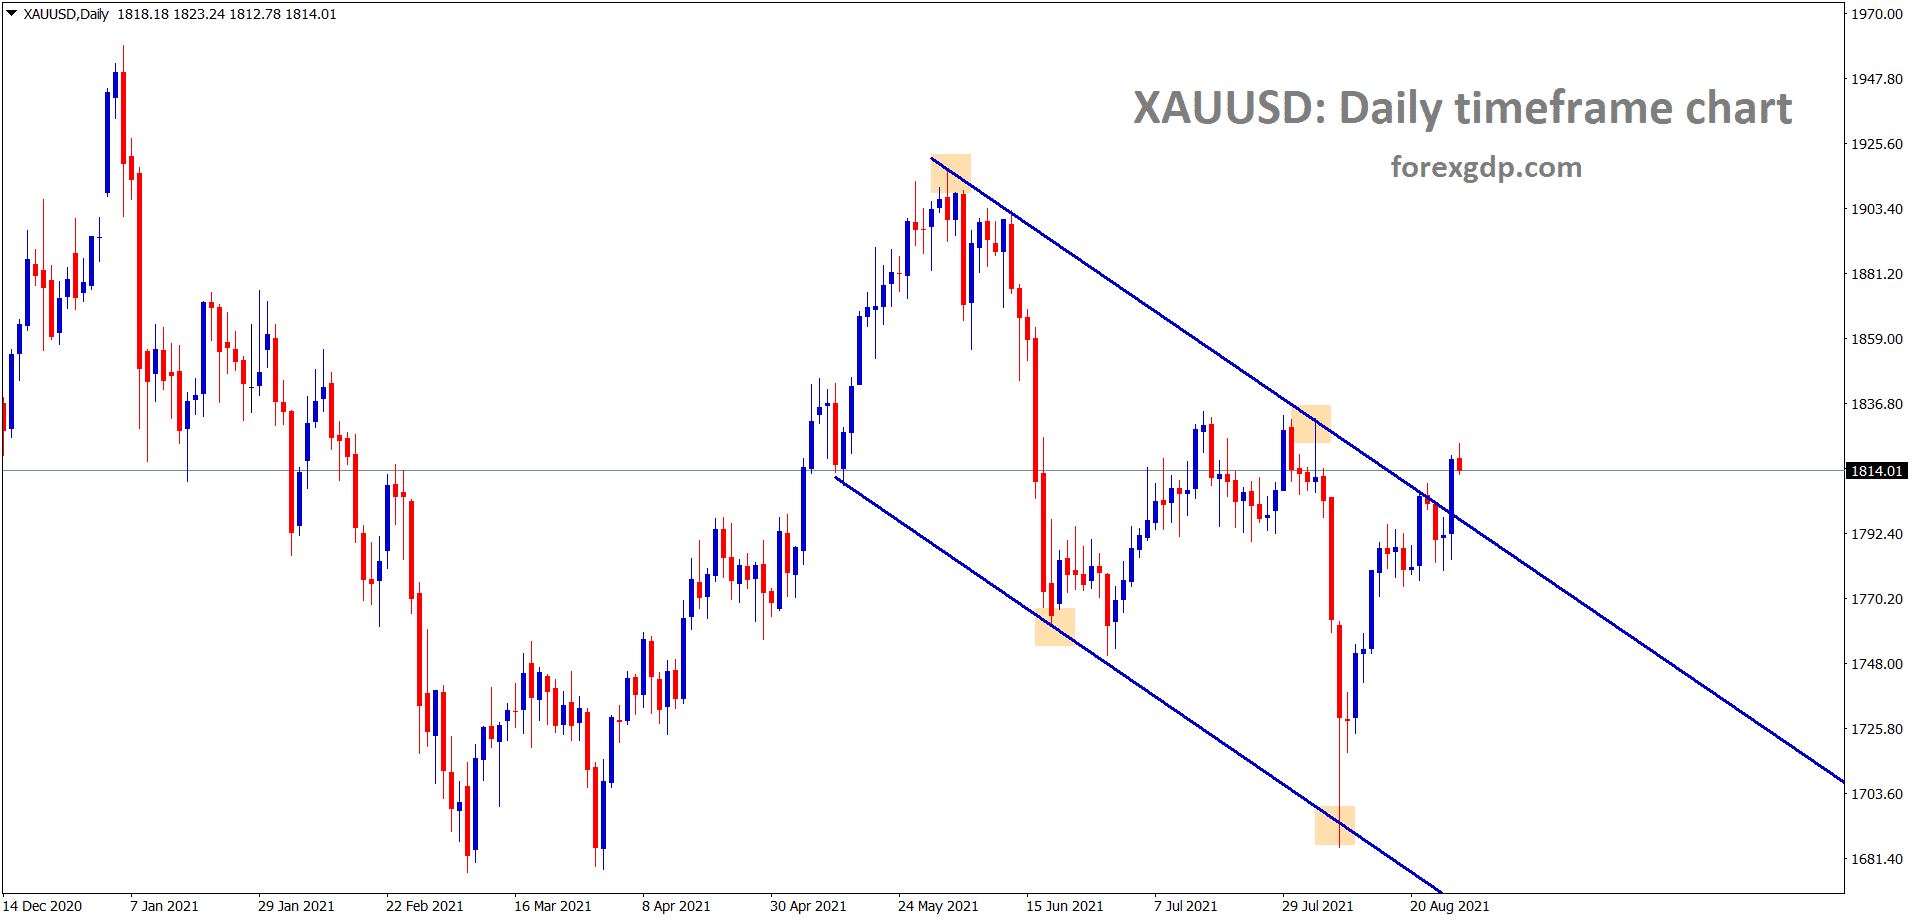 XAUUSD Gold price trying to break the lower high of the descending channel wait for the confirmation of breakout or reversal